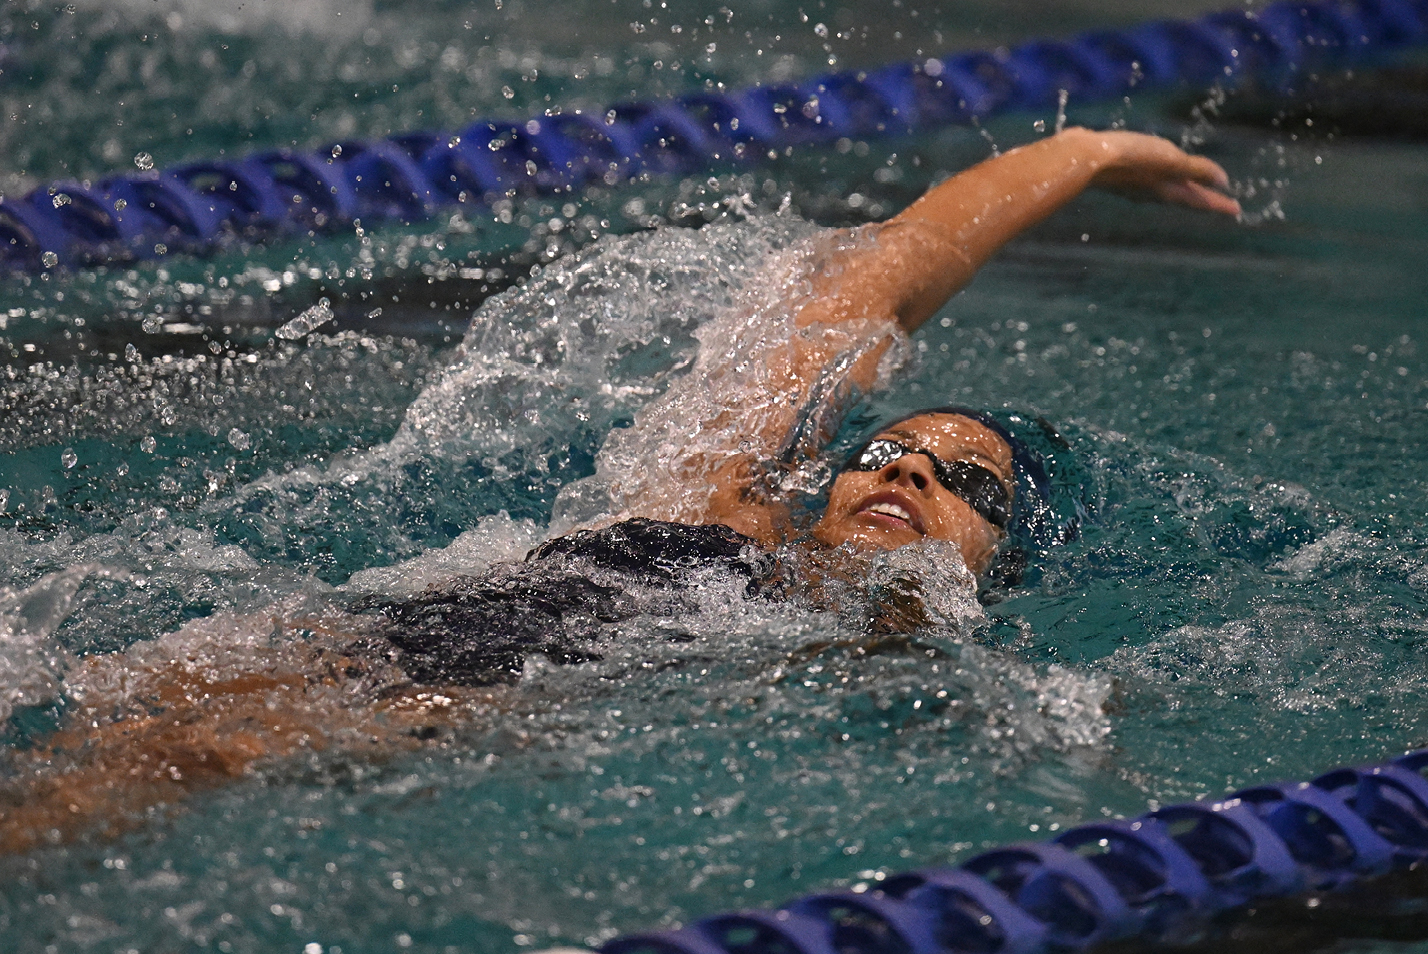 Sarah Franco swims the 200 backstroke for Connecticut College men’s and women’s swimming v. Amherst.